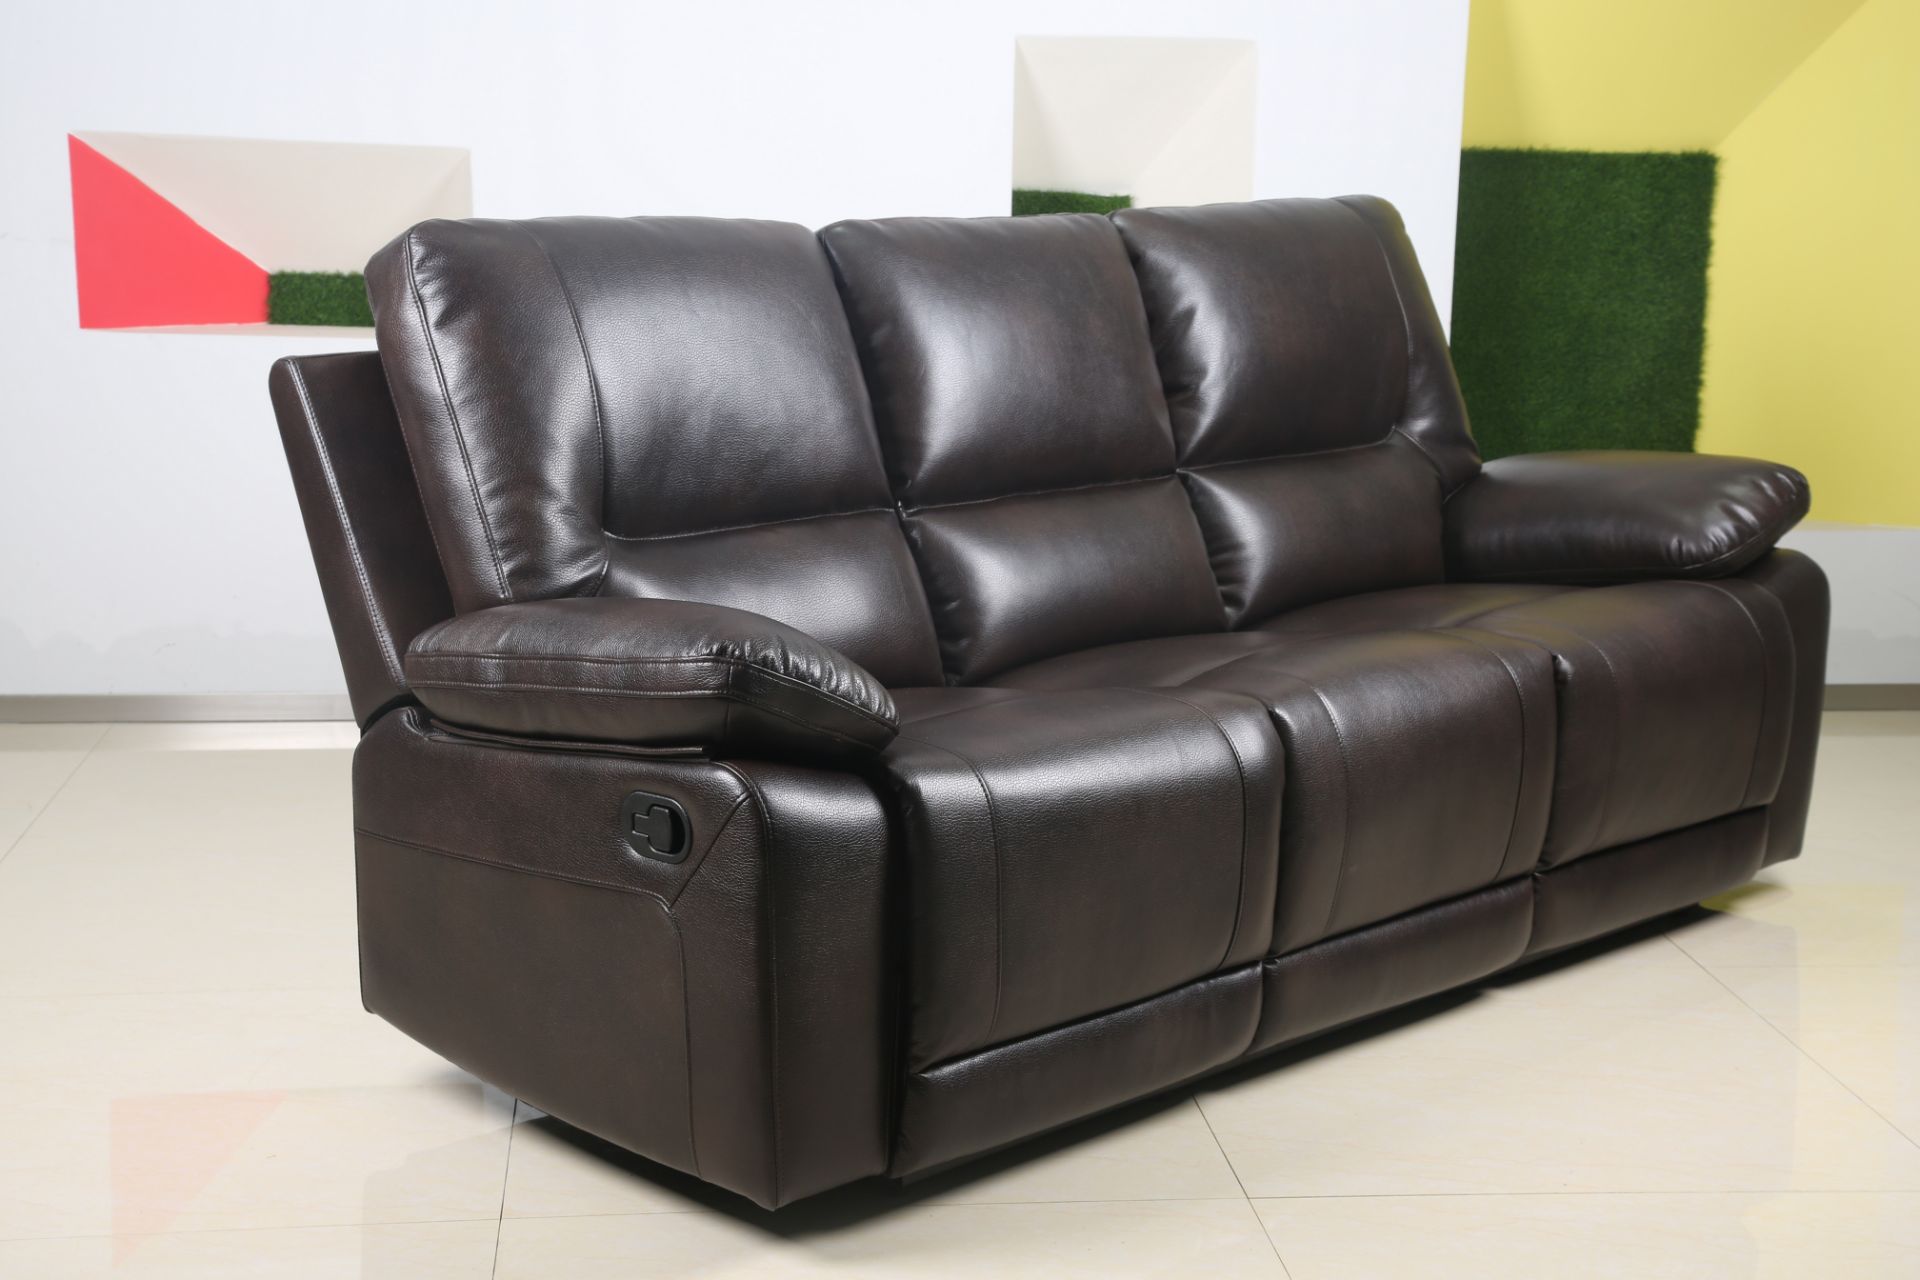 Leanne 3 seater leather reclining sofa in expresson brown leather